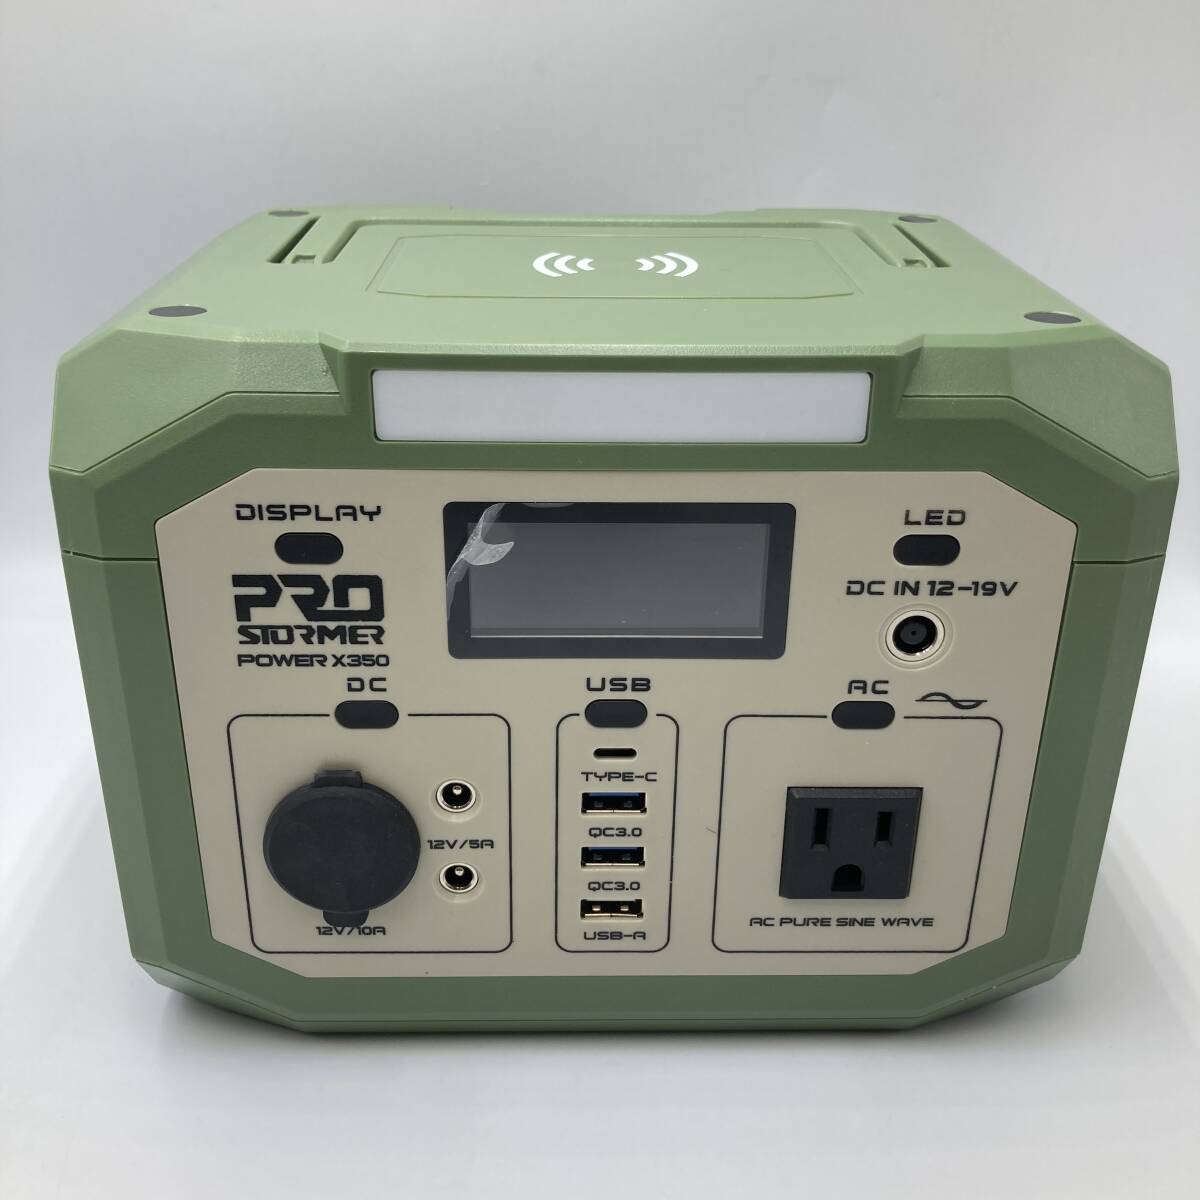 [ with translation ]PROSTOREER X350 portable power supply outdoor camp sleeping area in the vehicle family ground .. electro- disaster prevention goods for emergency power supply /Y21262-S2